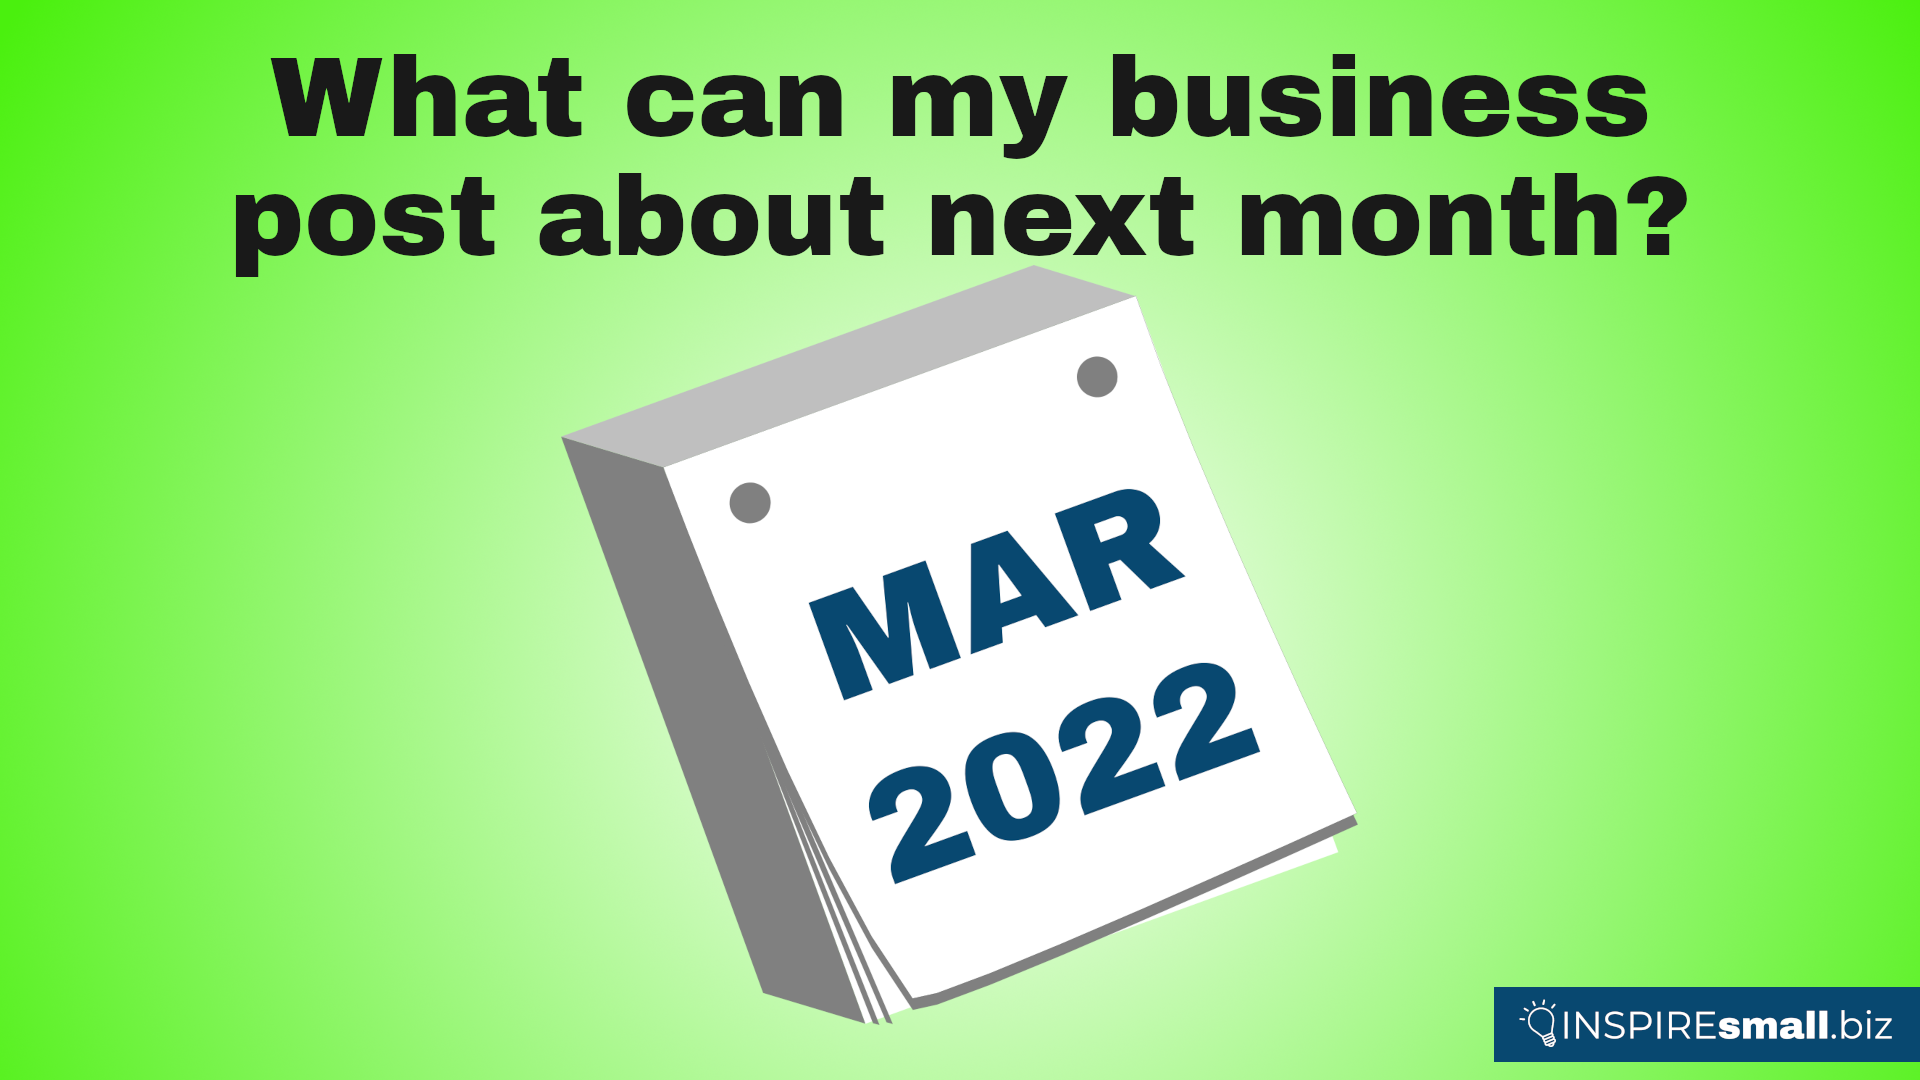 What can my business post about next month? March 2022. Blog from INSPIREsmall.biz